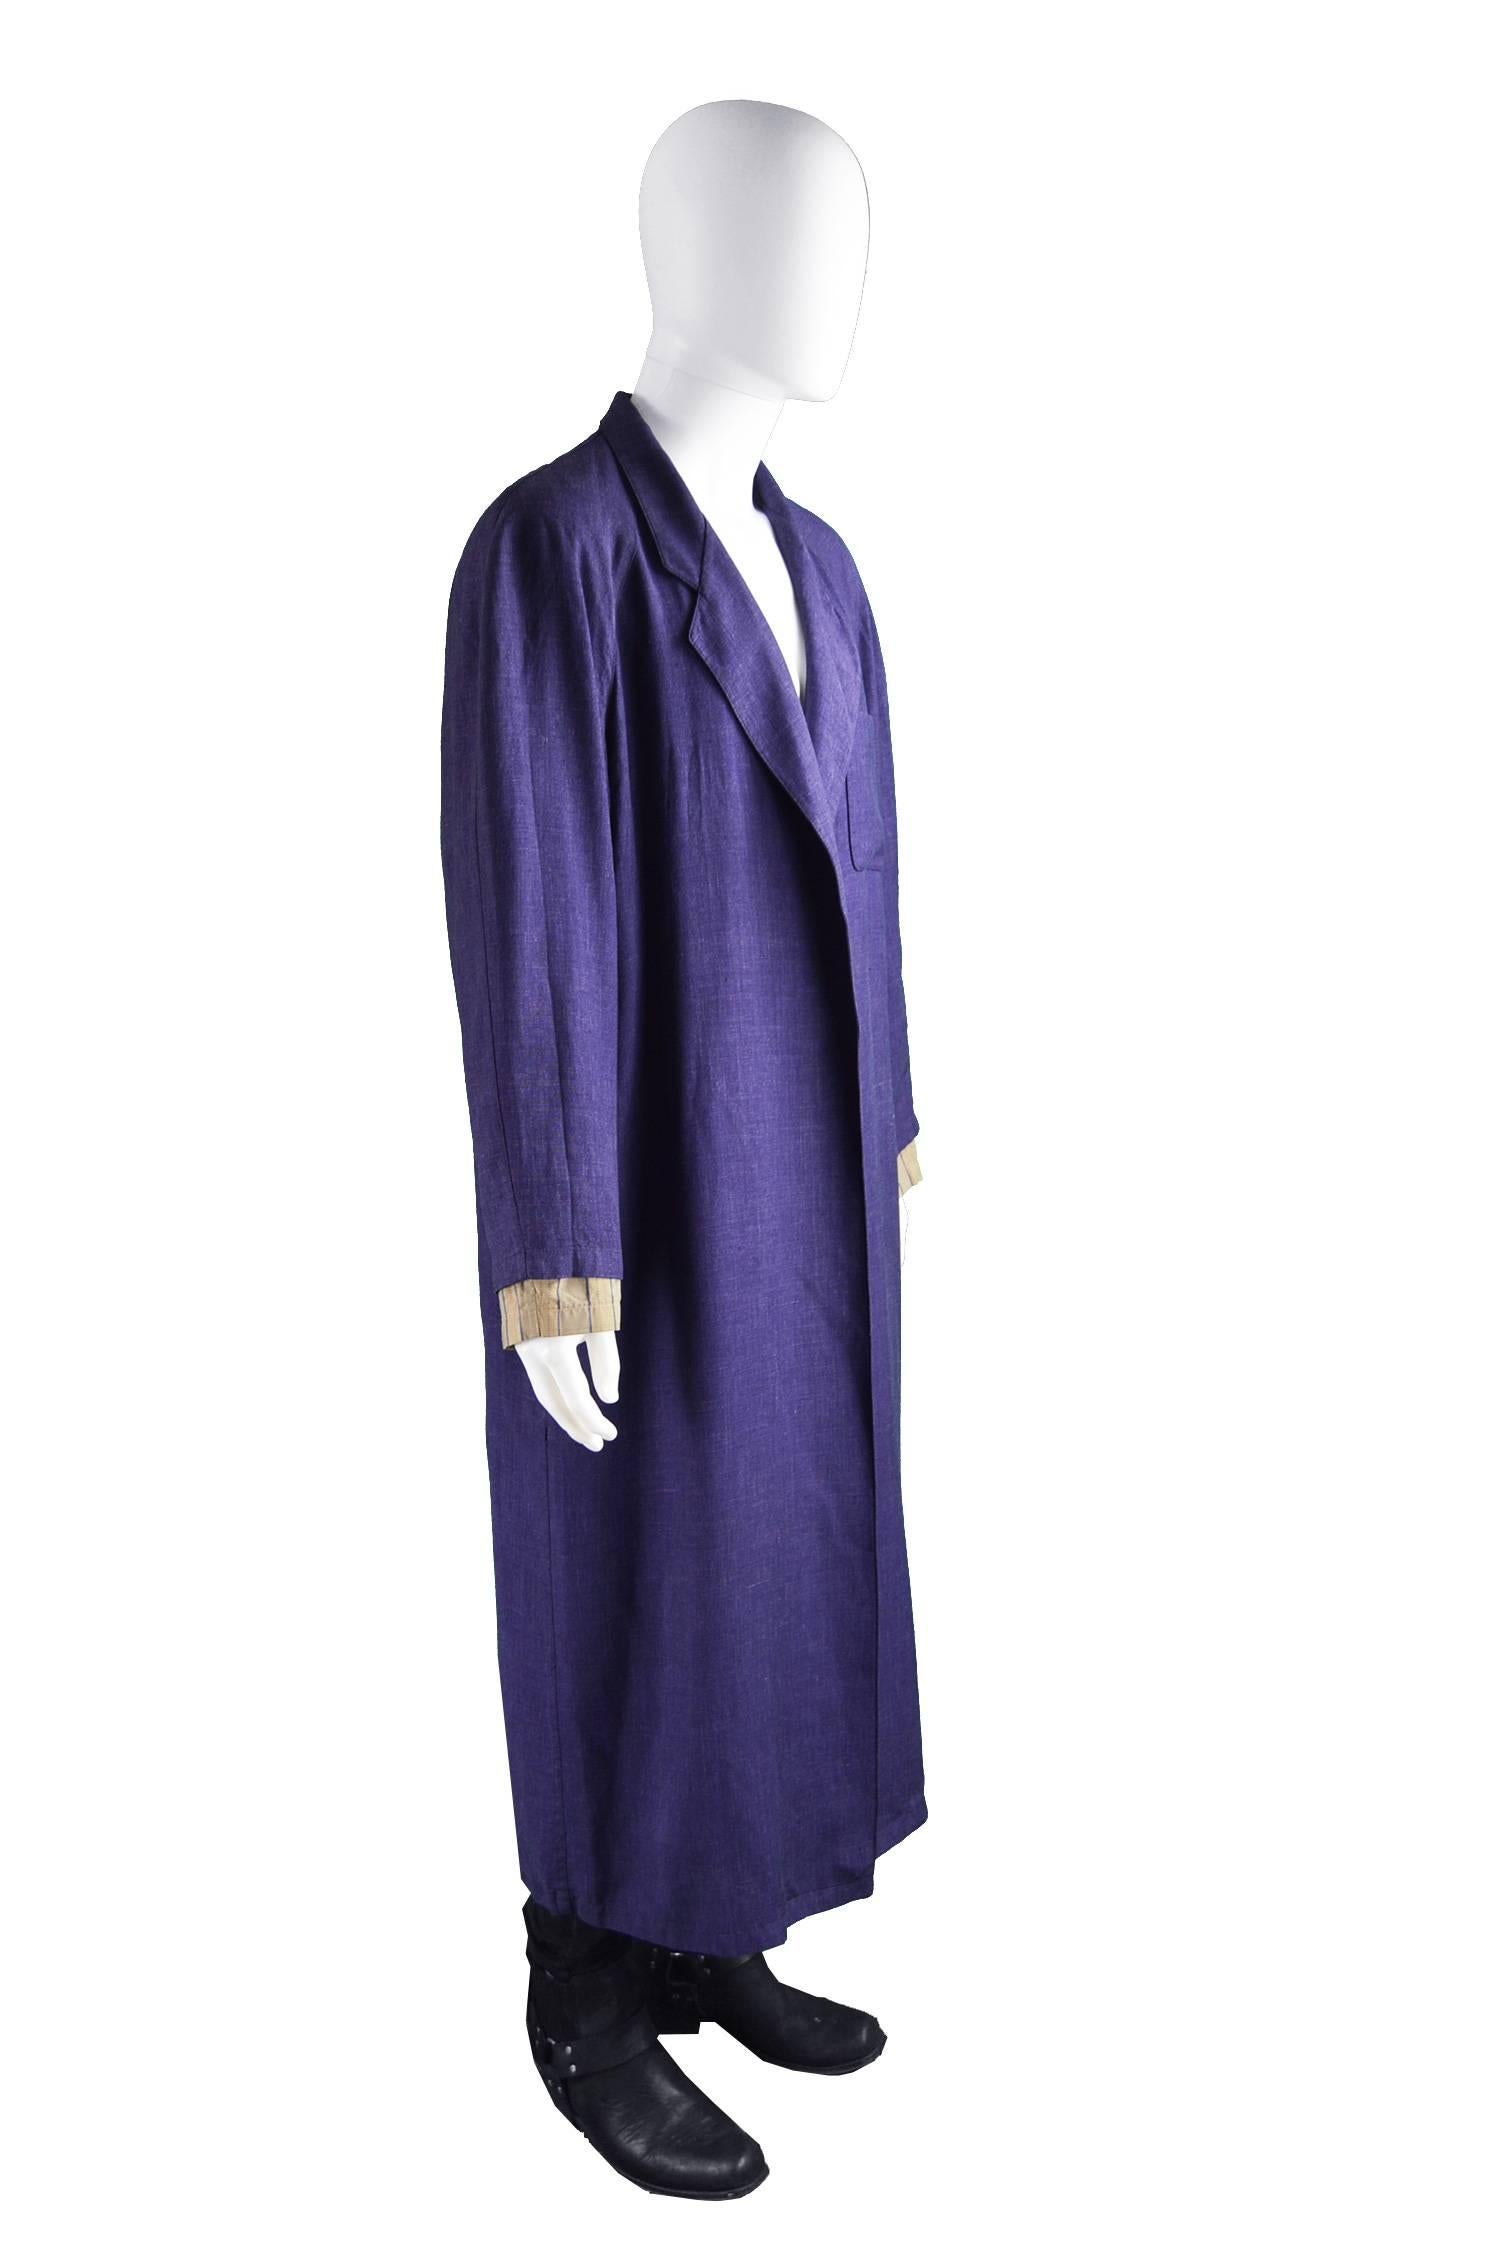 Jean Paul Gaultier Homme Pour Gibo Loose Purple Linen Coat, 1980s In Excellent Condition In Doncaster, South Yorkshire